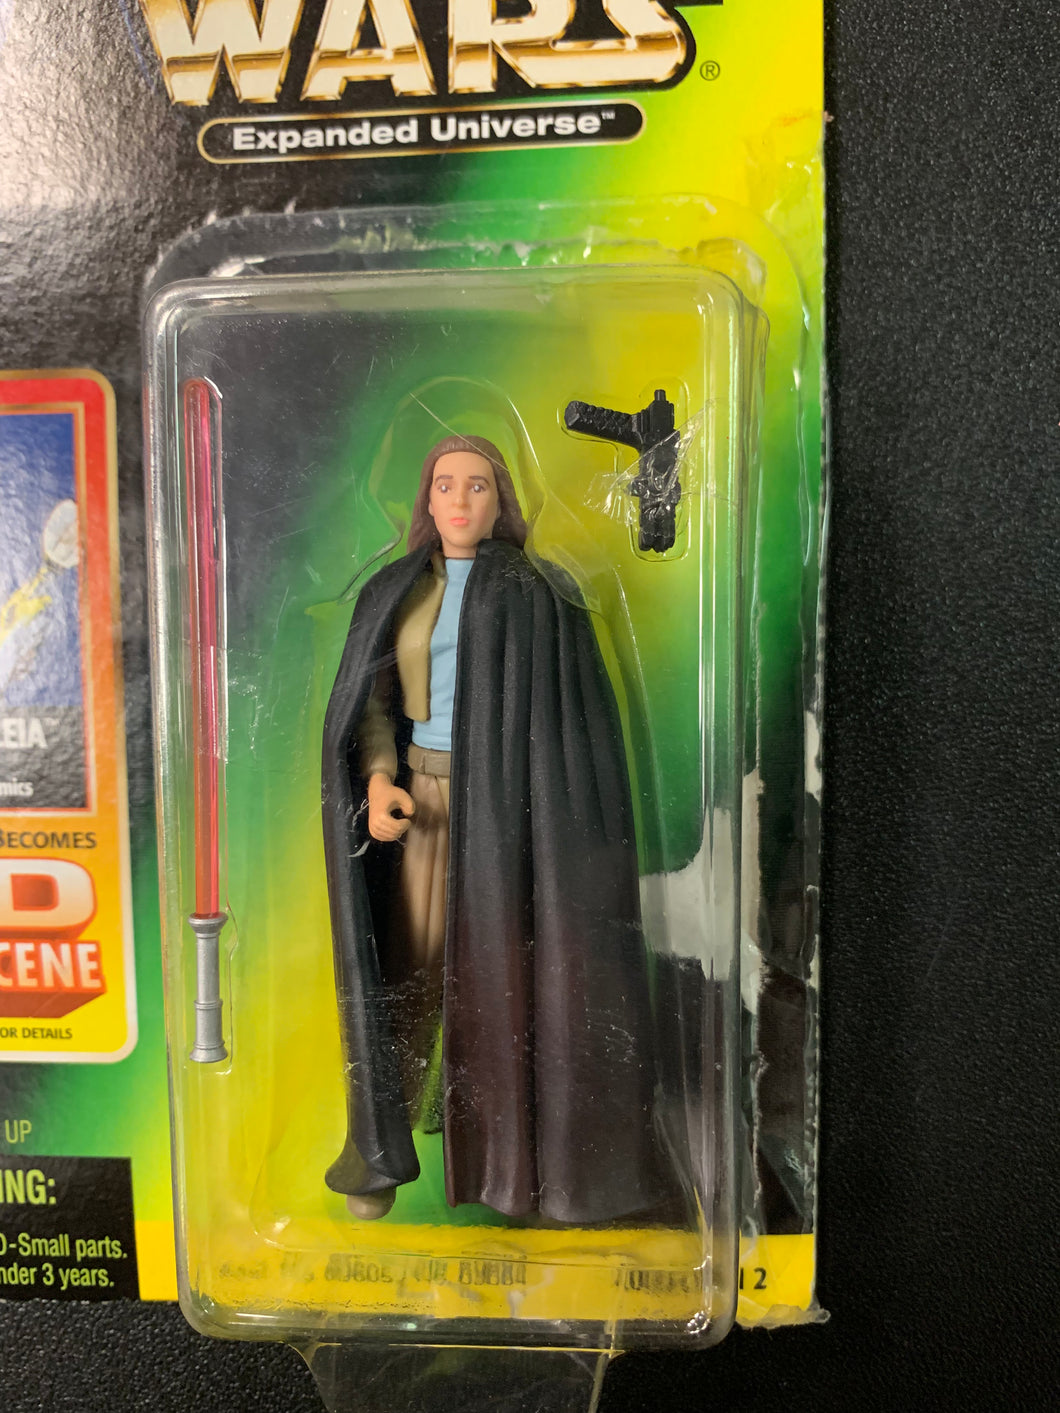 KENNER STAR WARS EXPANDED UNIVERSE 3D PLAYSCENE PRINCESS LEIA FROM DARK EMPIRE COMICS TAPED TO CARD